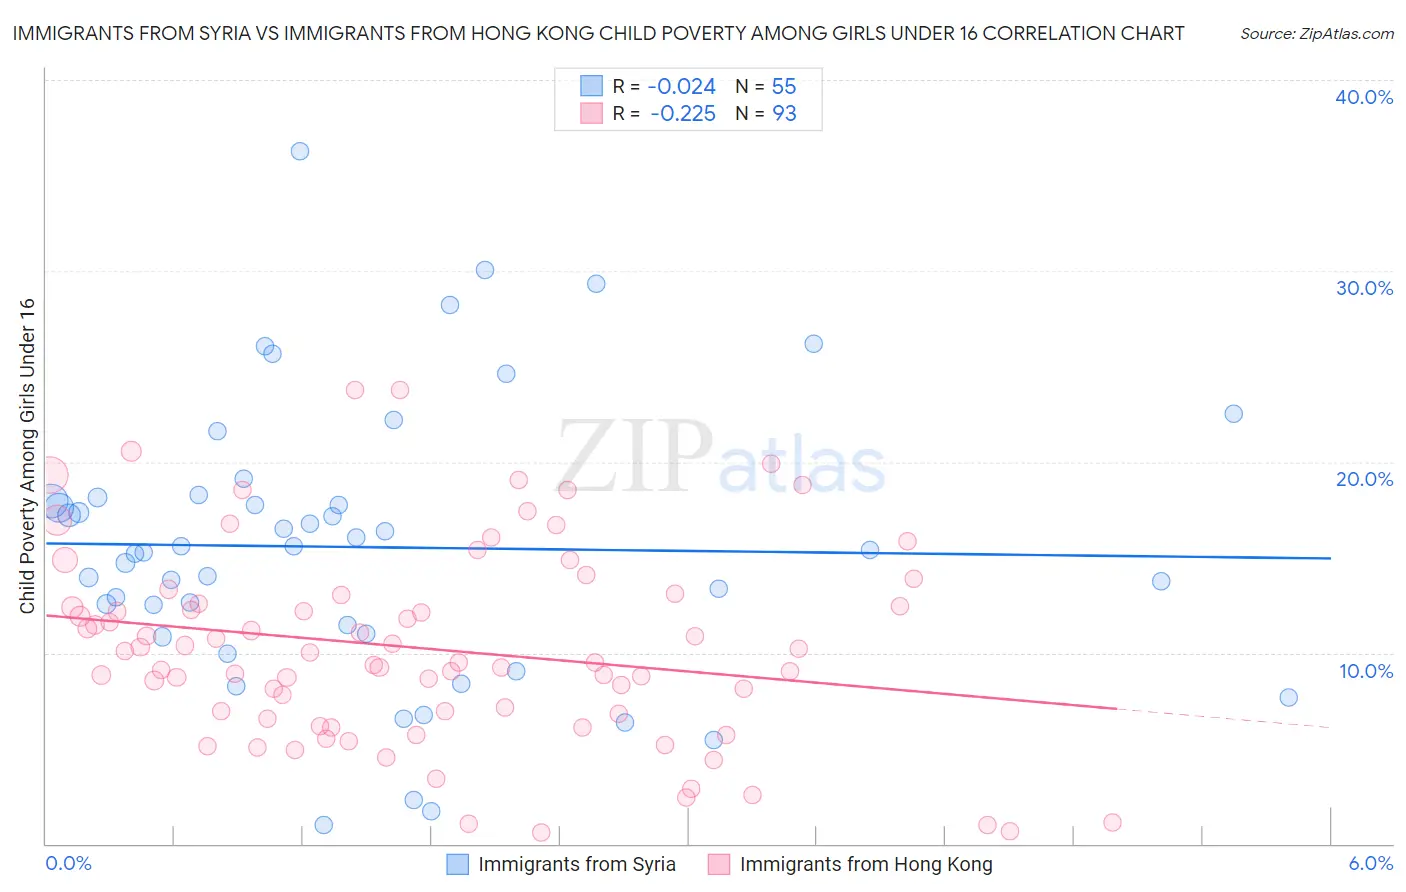 Immigrants from Syria vs Immigrants from Hong Kong Child Poverty Among Girls Under 16